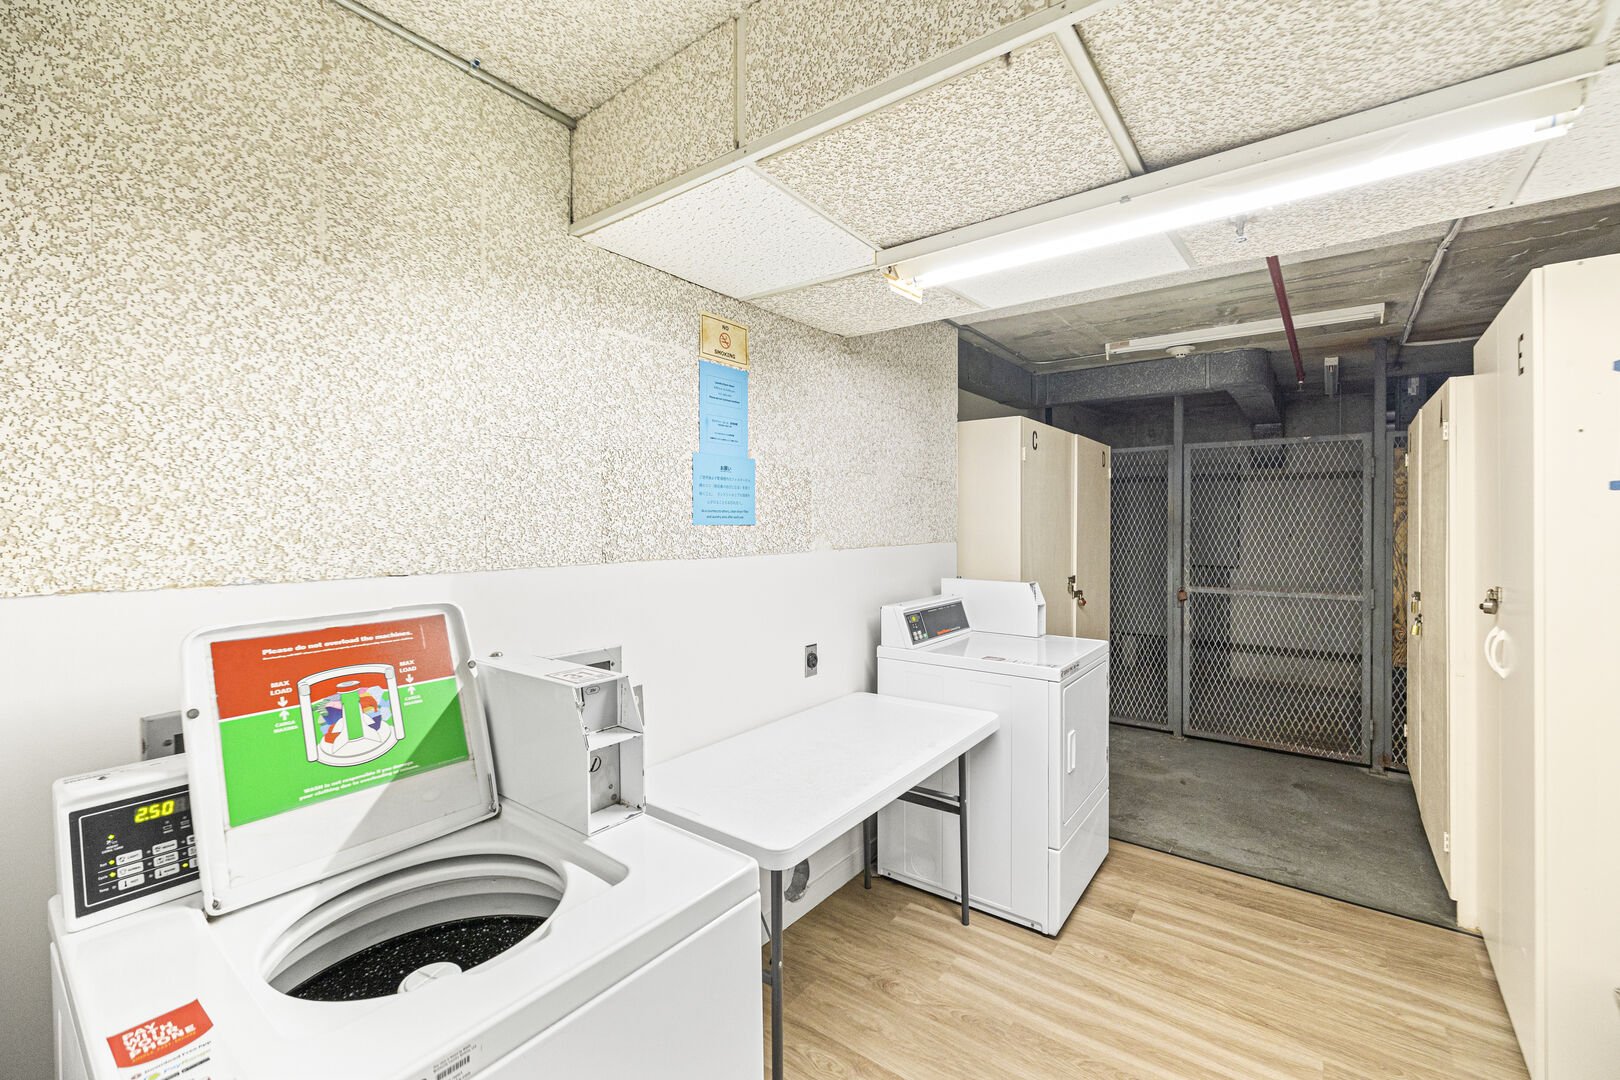 Laundry room on each floor with coin-operated washers and dryers